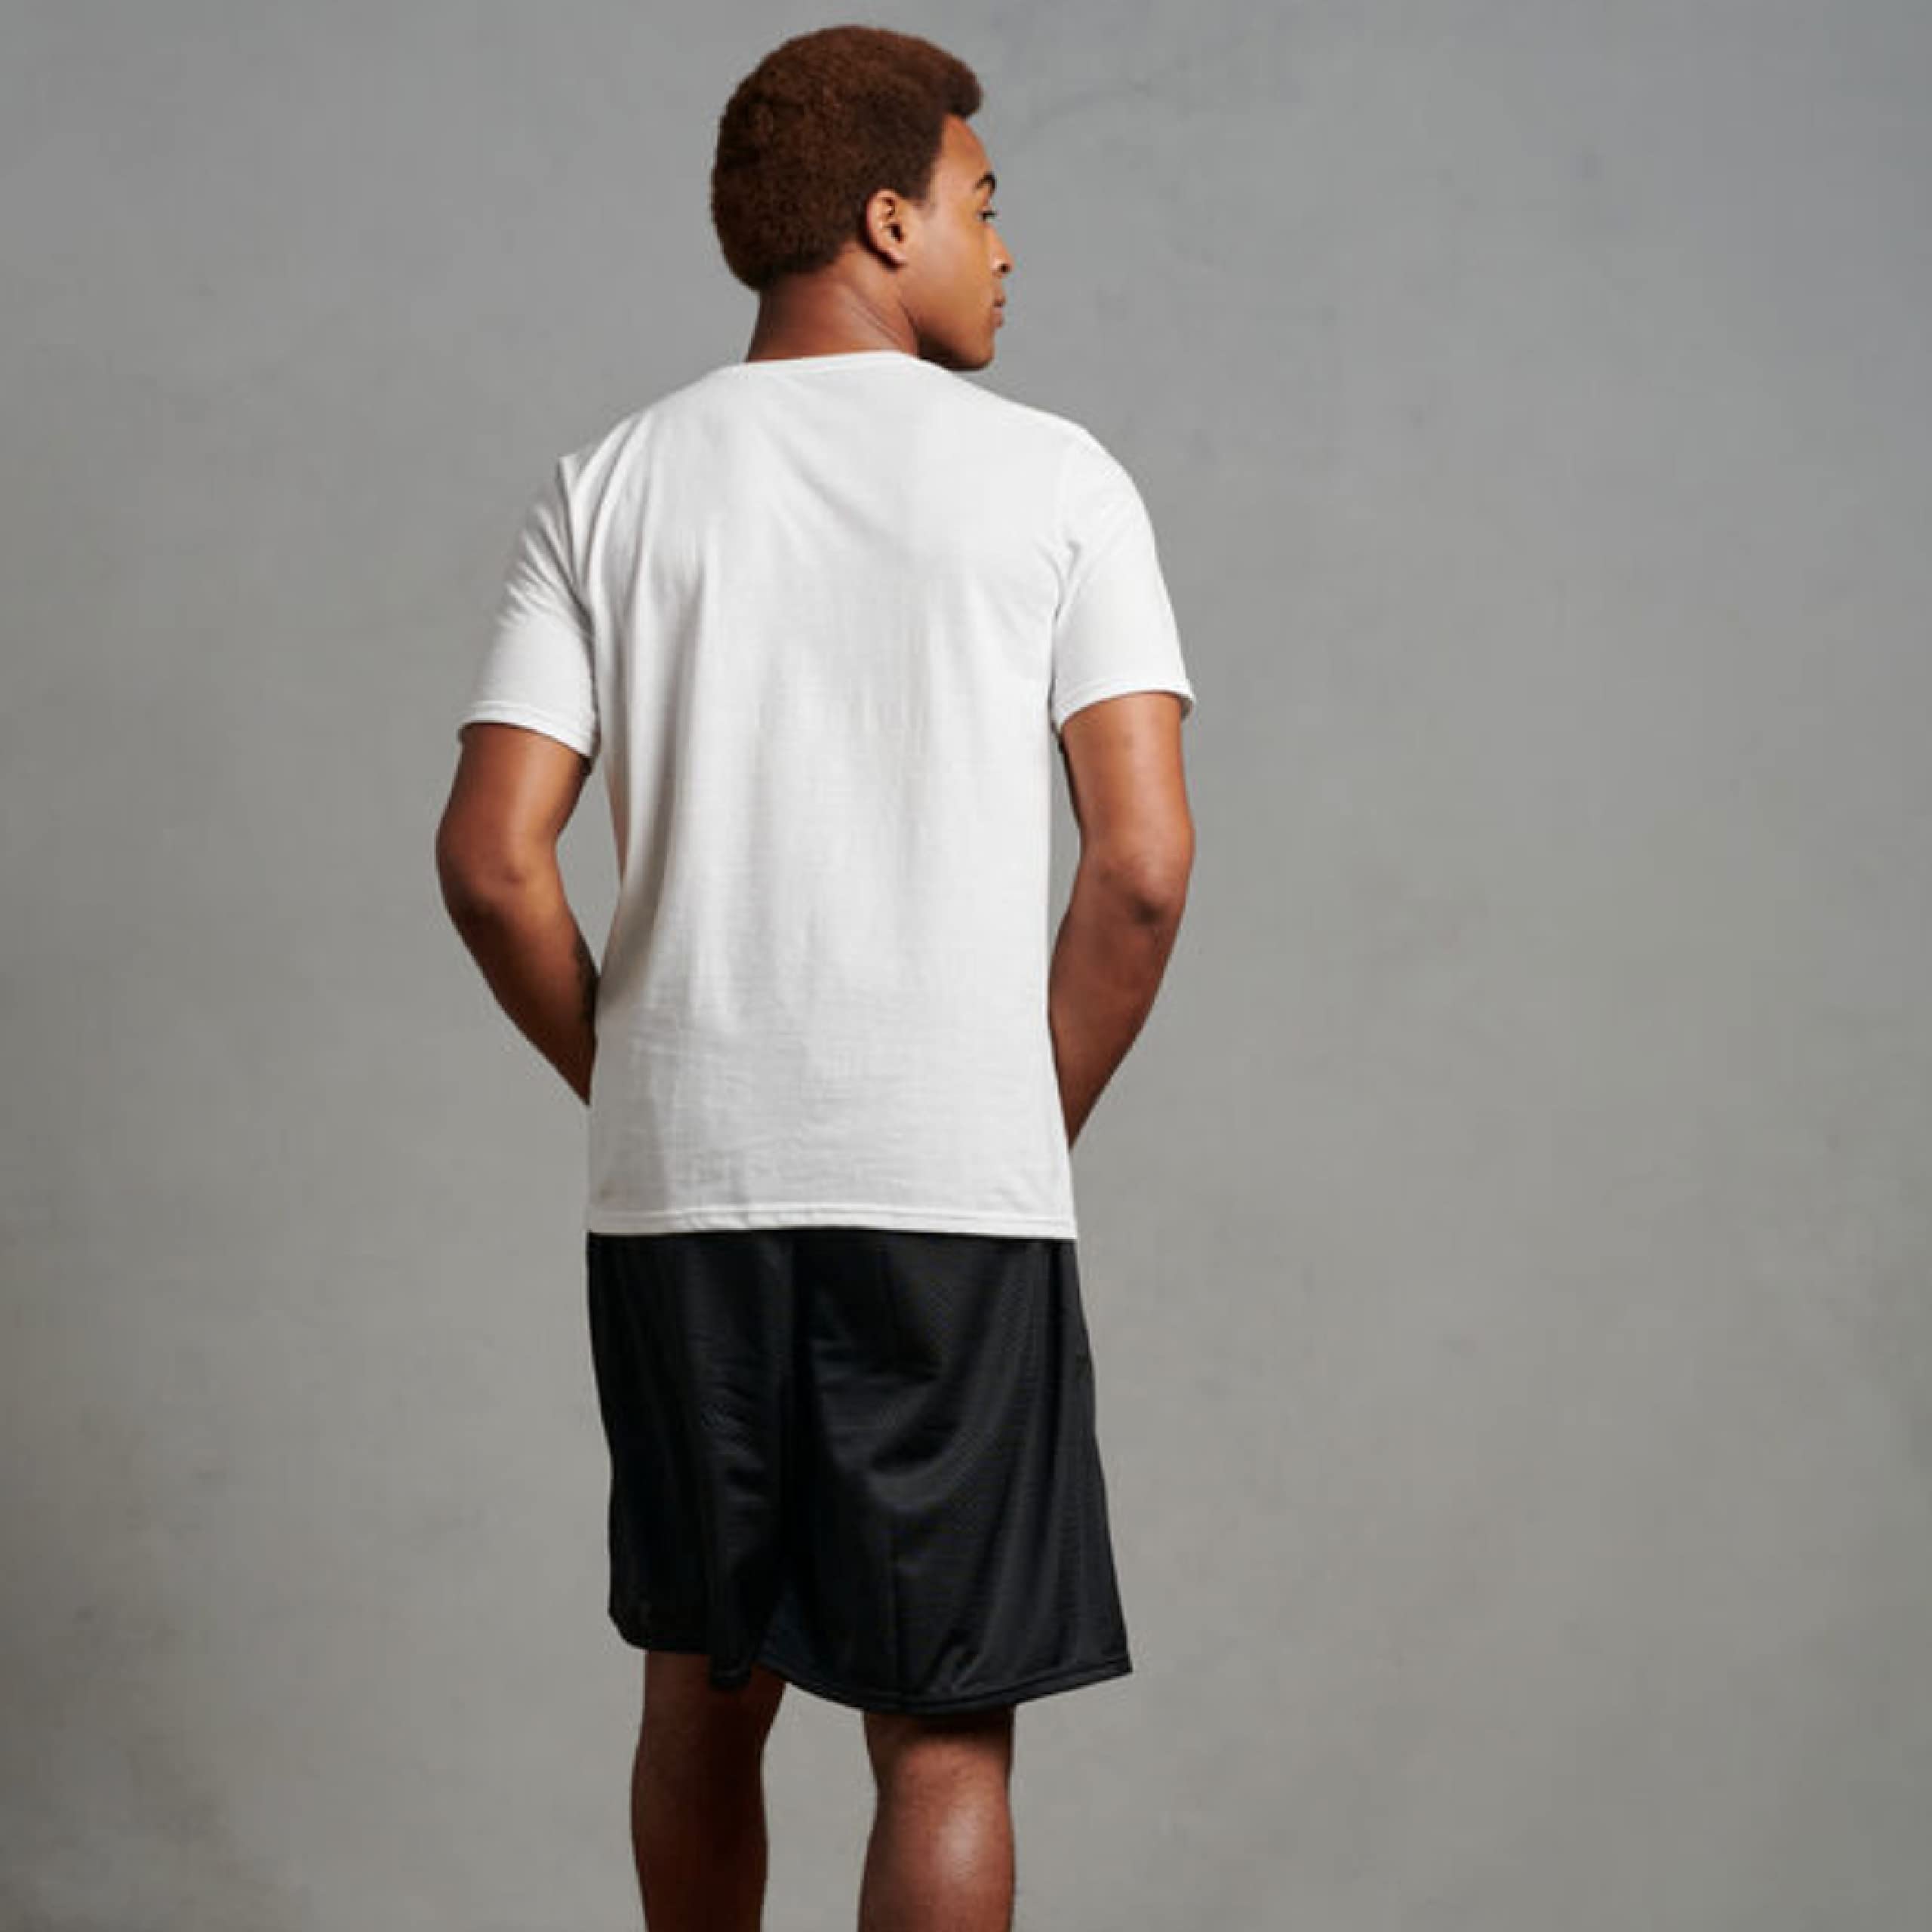 Russell Athletic Big Boys' Youth Mesh Short